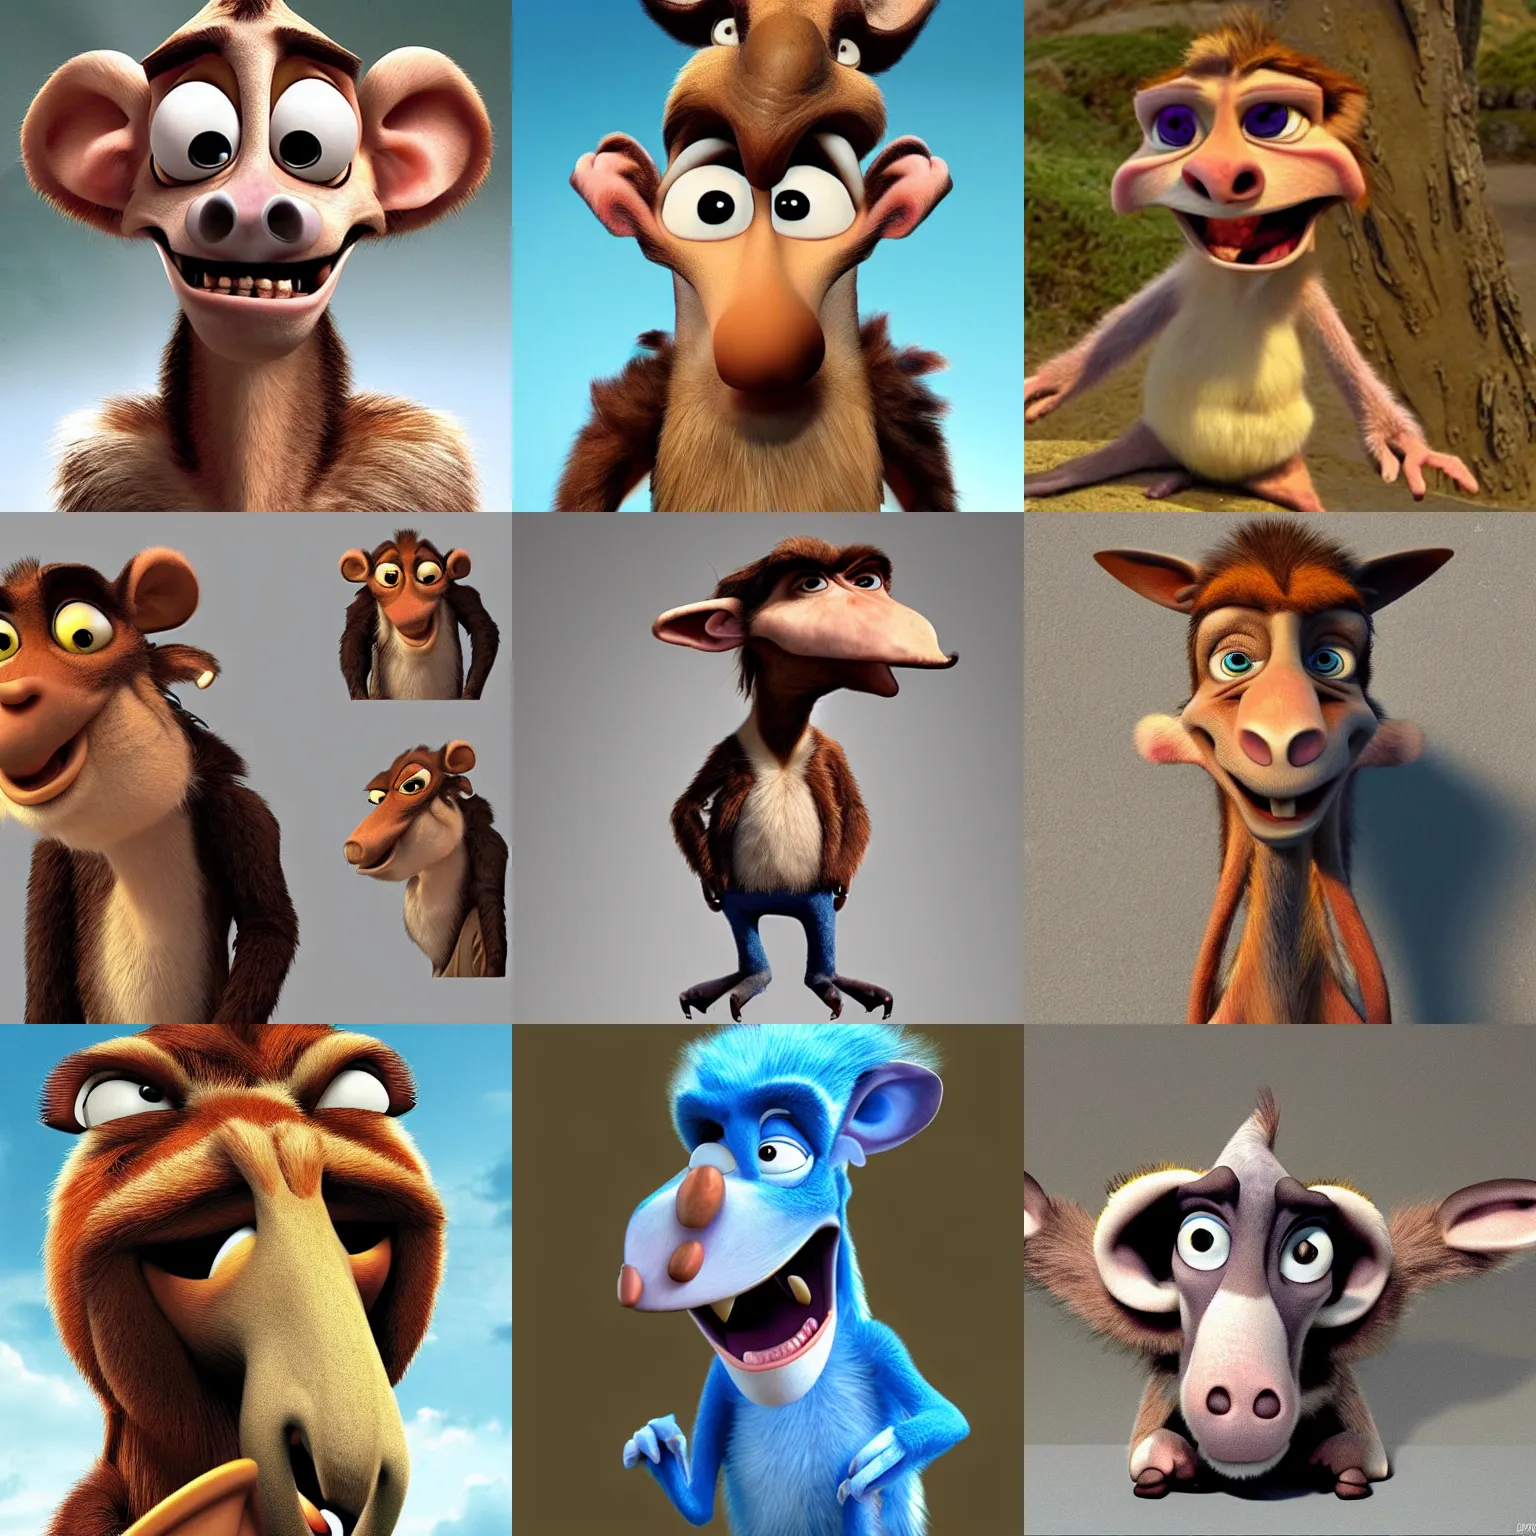 sid character from ice age, sid, sid character | Stable Diffusion | OpenArt